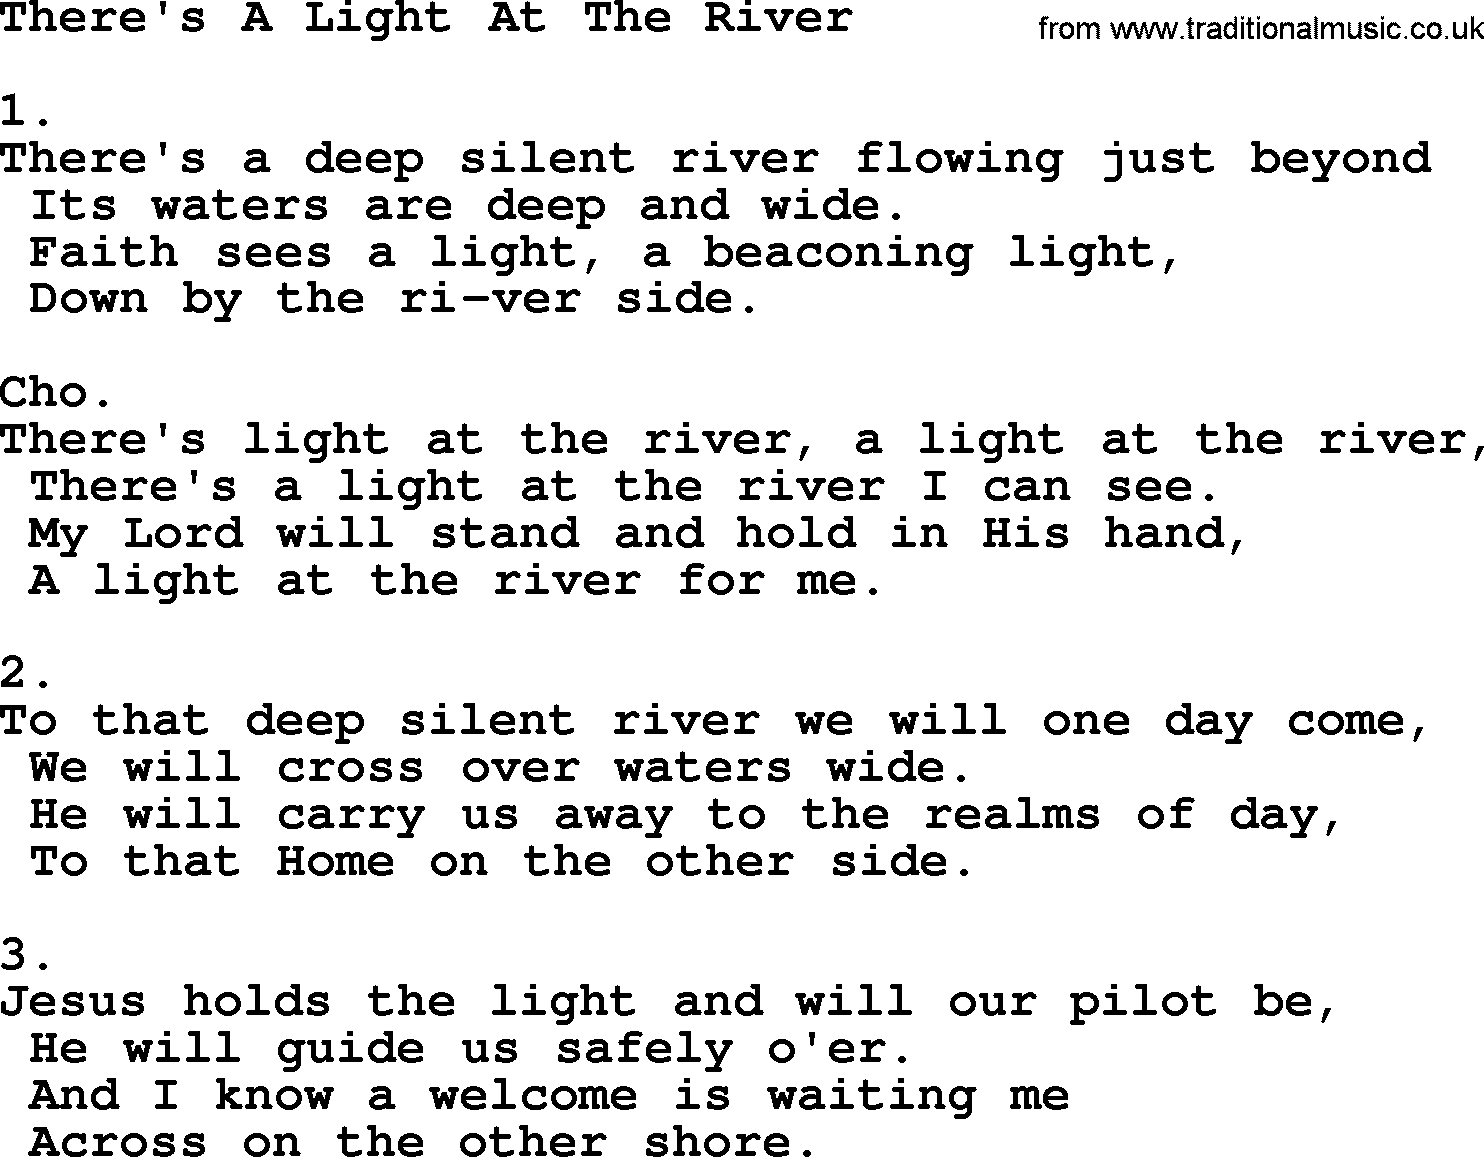 Apostolic & Pentecostal Hymns and Songs, Hymn: There's A Light At The River lyrics and PDF